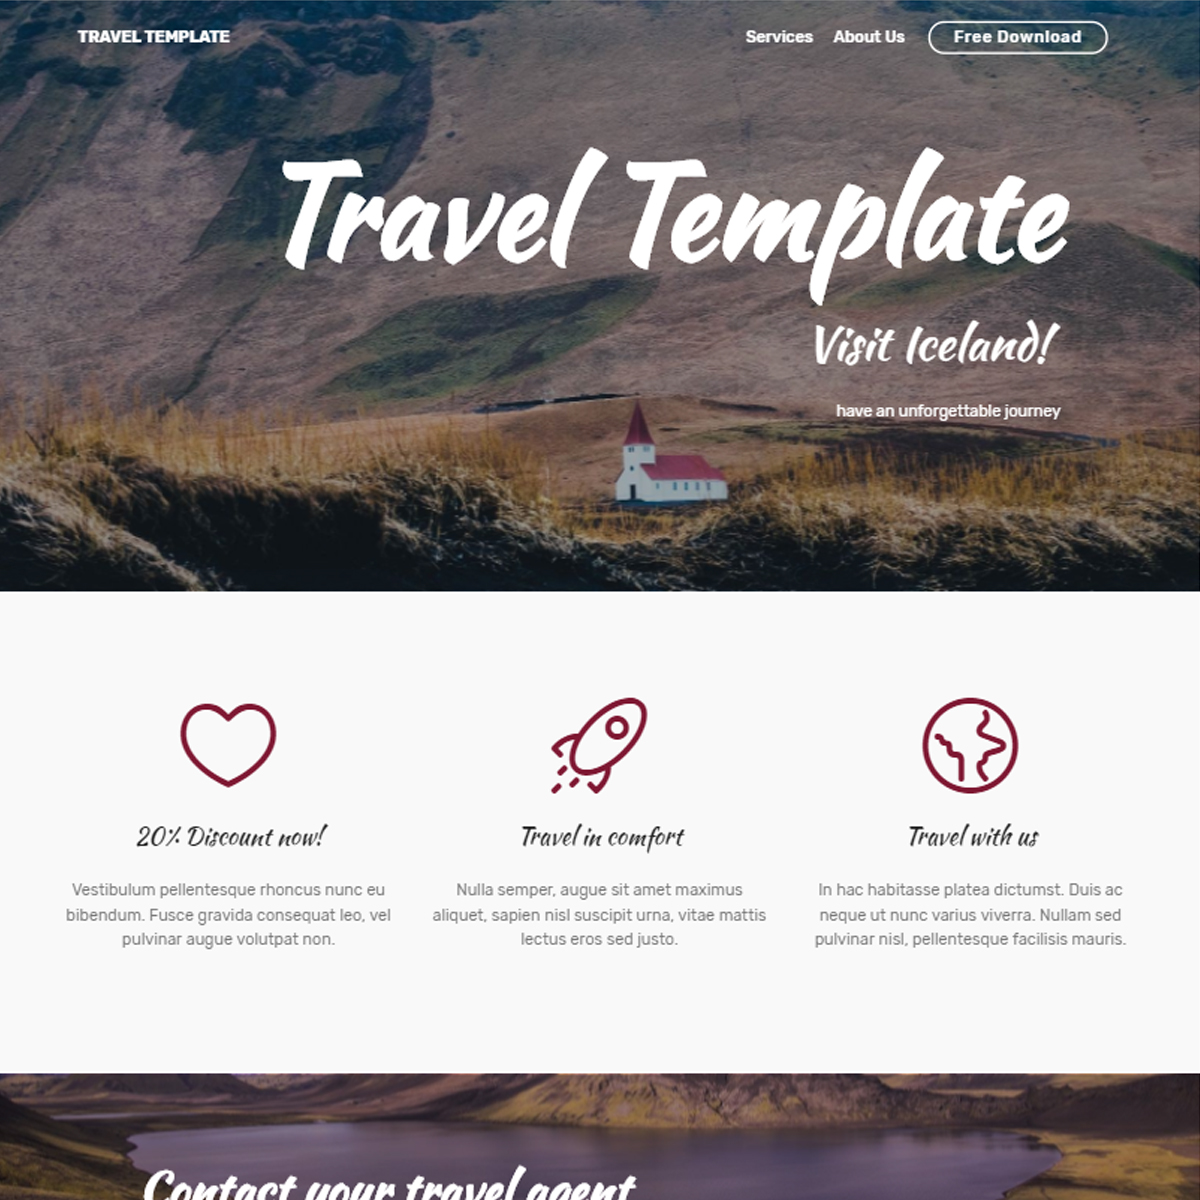 Bootstrap Travel Template